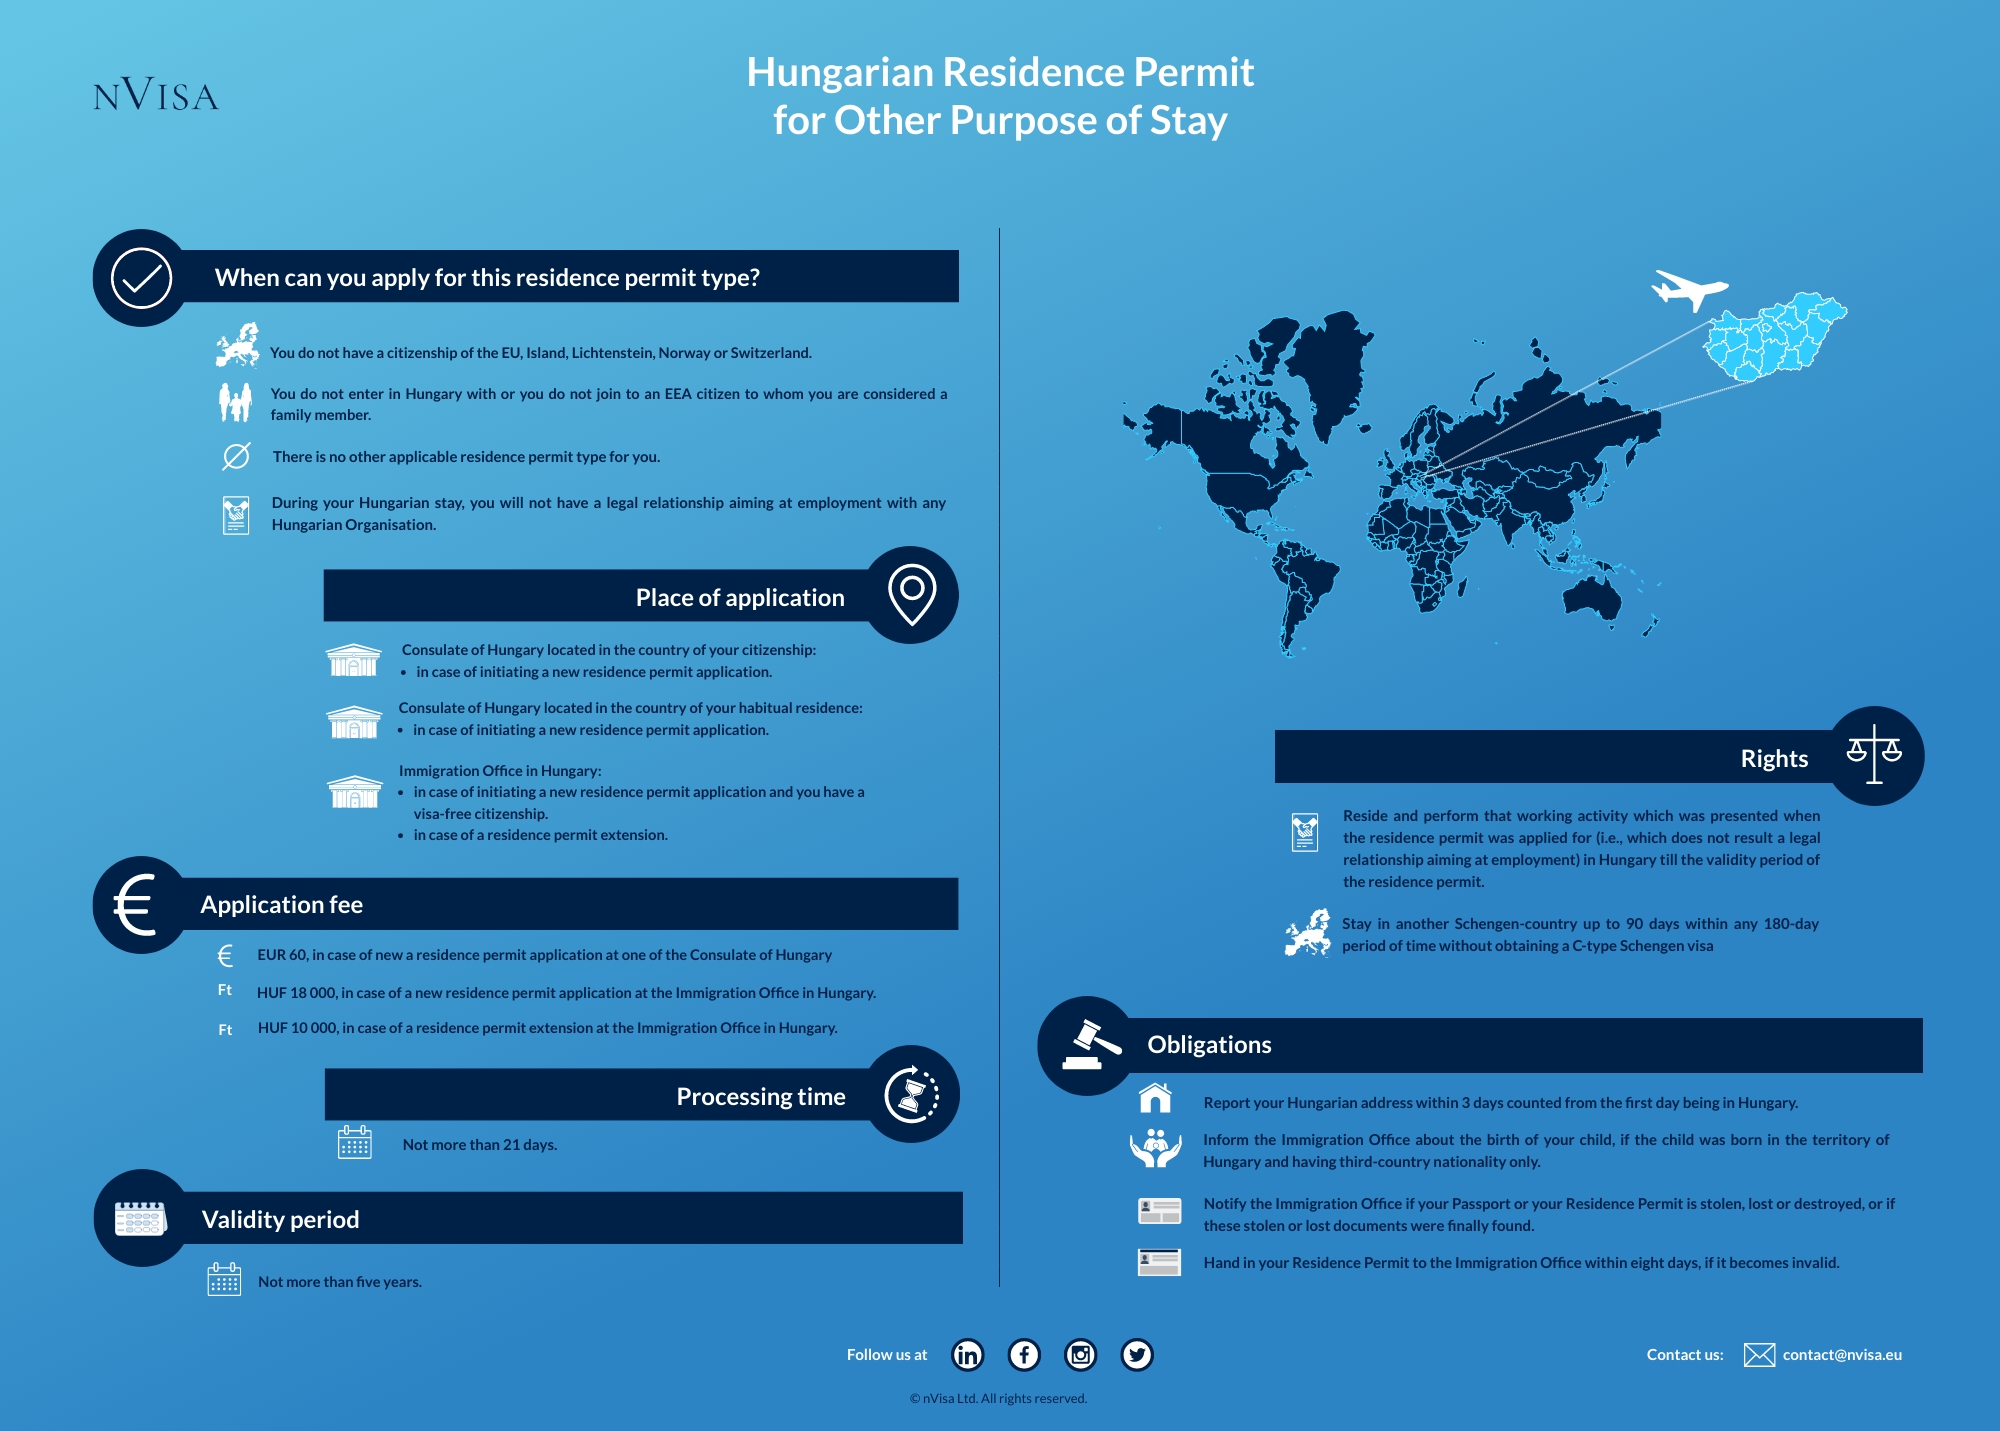 Infographic about immigration requirements and the details of obtaining a Residence Permit for the Purpose of Seasonal Employment in Hungary.